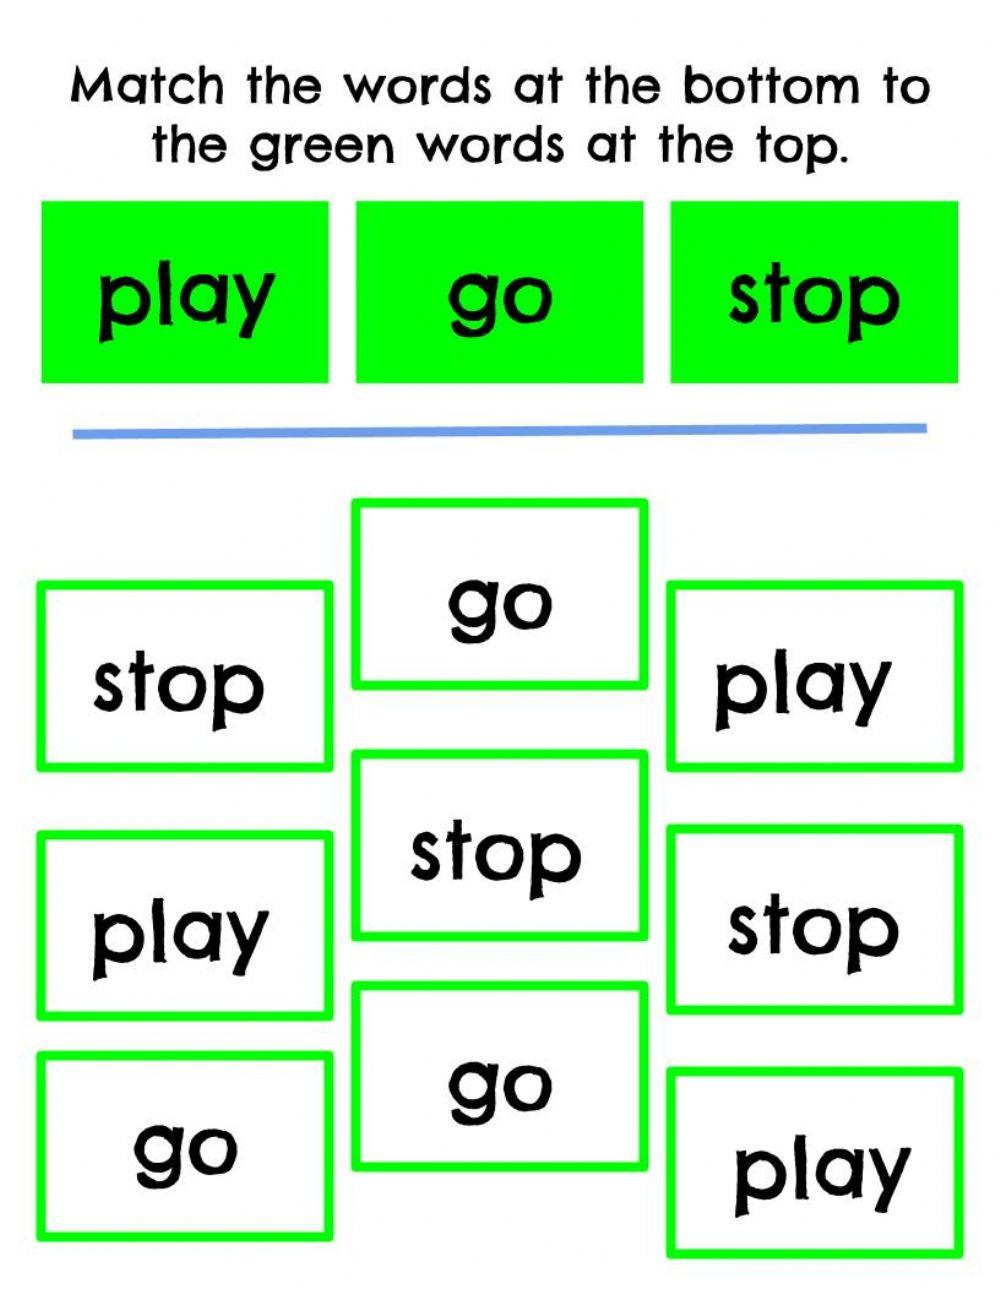 Match Sight Words: go, play, stop